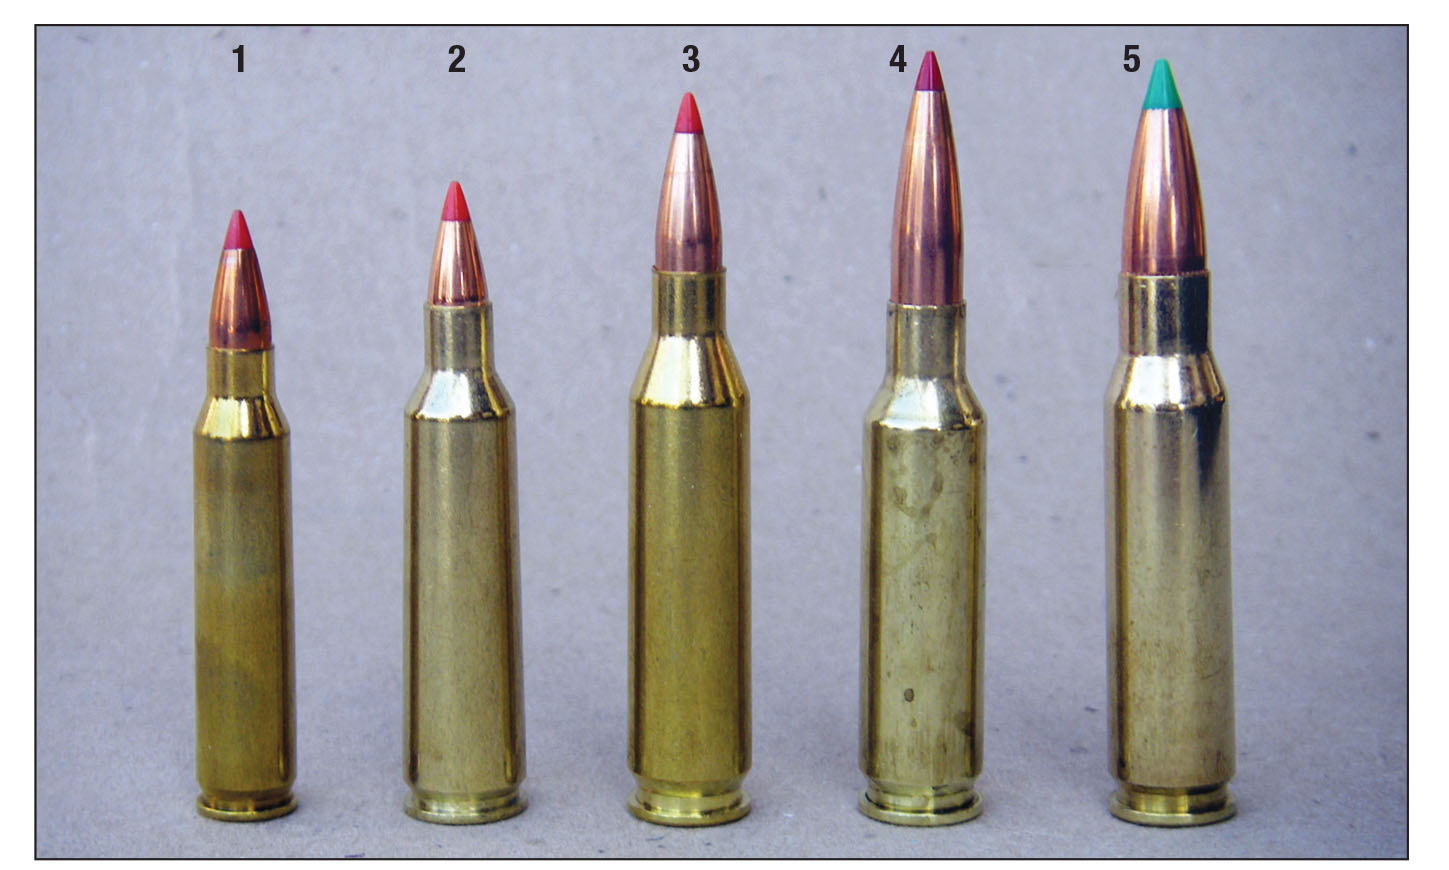 MGM barrels are offered in a variety of popular sporting cartridges, including the (1) .223 Remington, (2) .22-250 Remington, (3) .243 Winchester, (4) 6.5 Creedmoor, (5) .308 Winchester and many others.